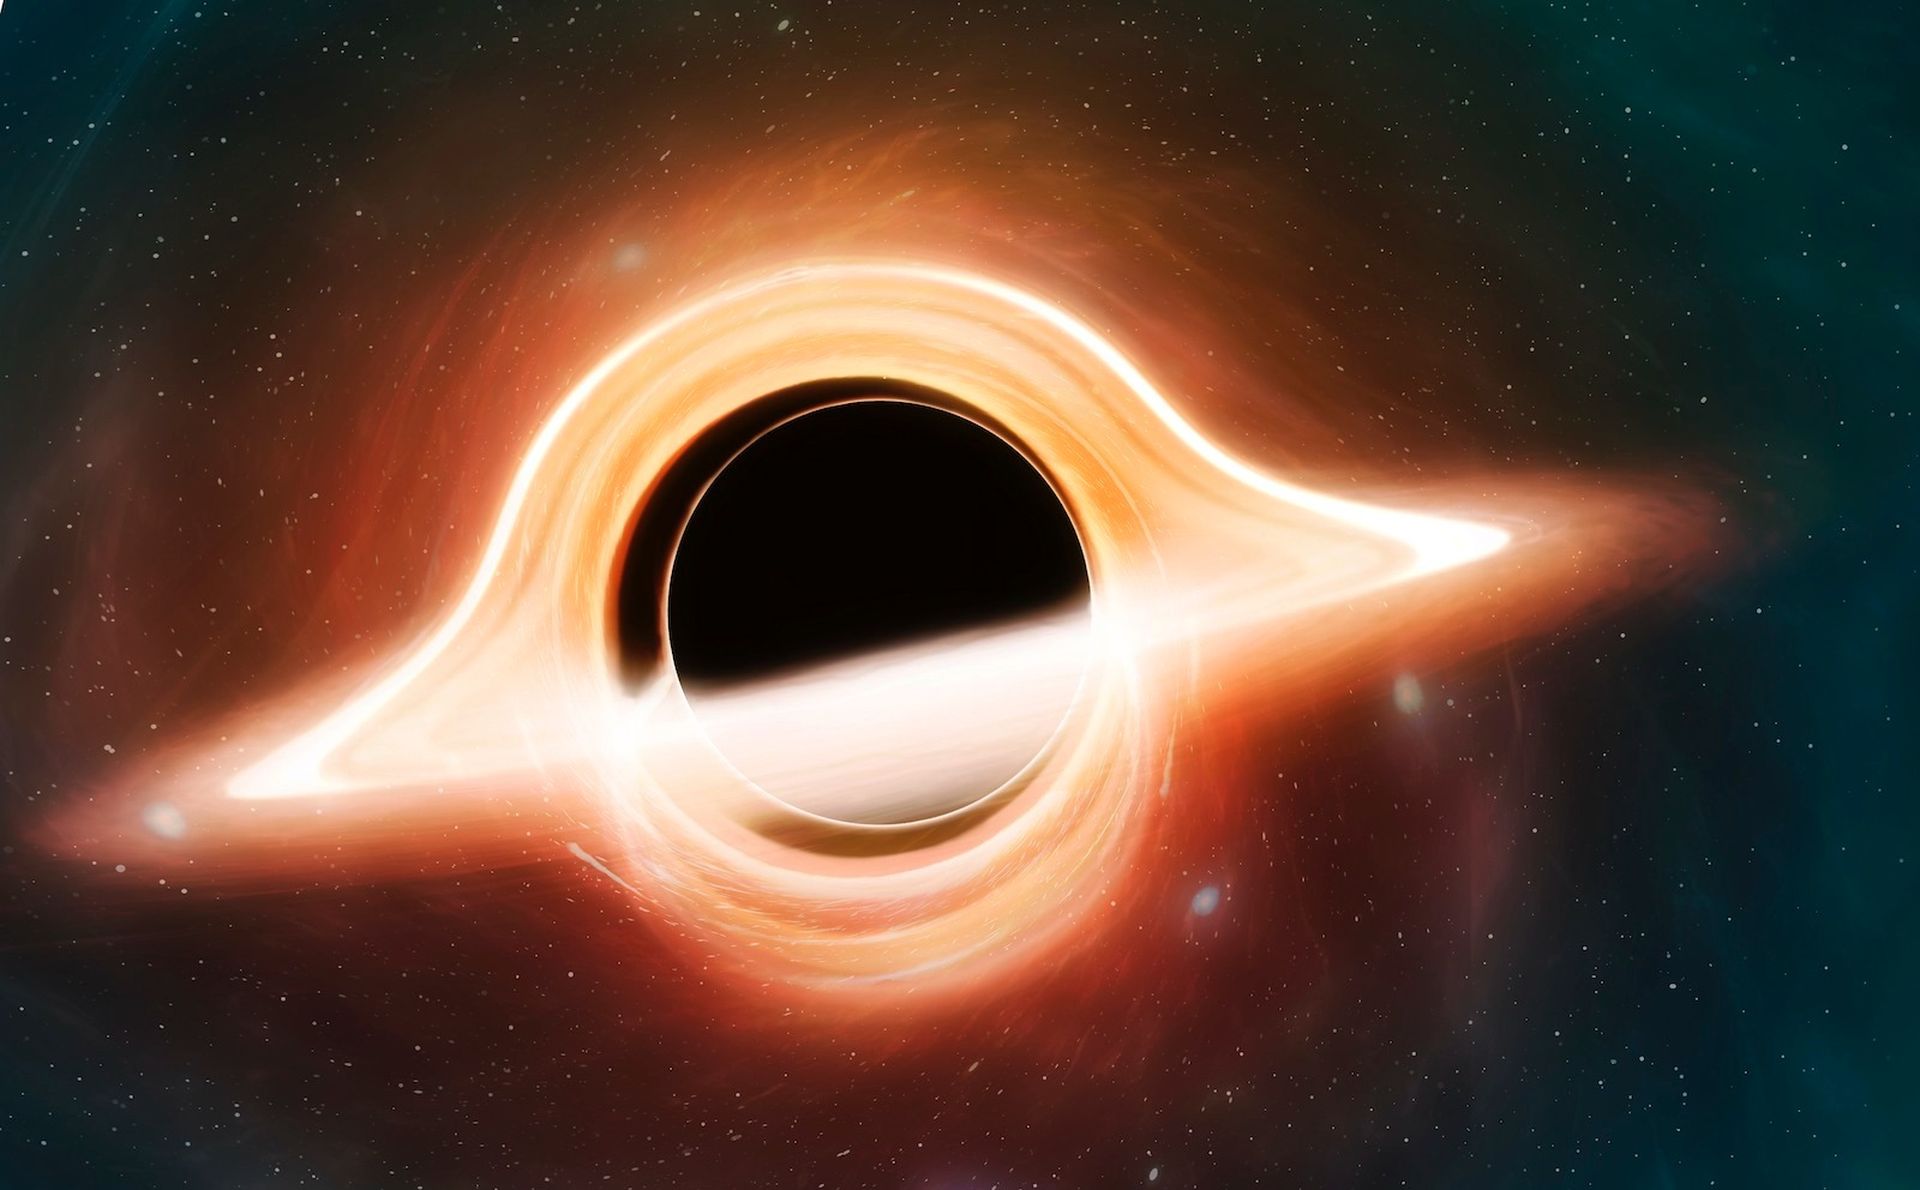 Scientists have managed to picture Saggittarius A*, a supermassive black hole that lives at the center of our Milky Way galaxy. It is a staggering black hole, four million times the mass of our Sun.